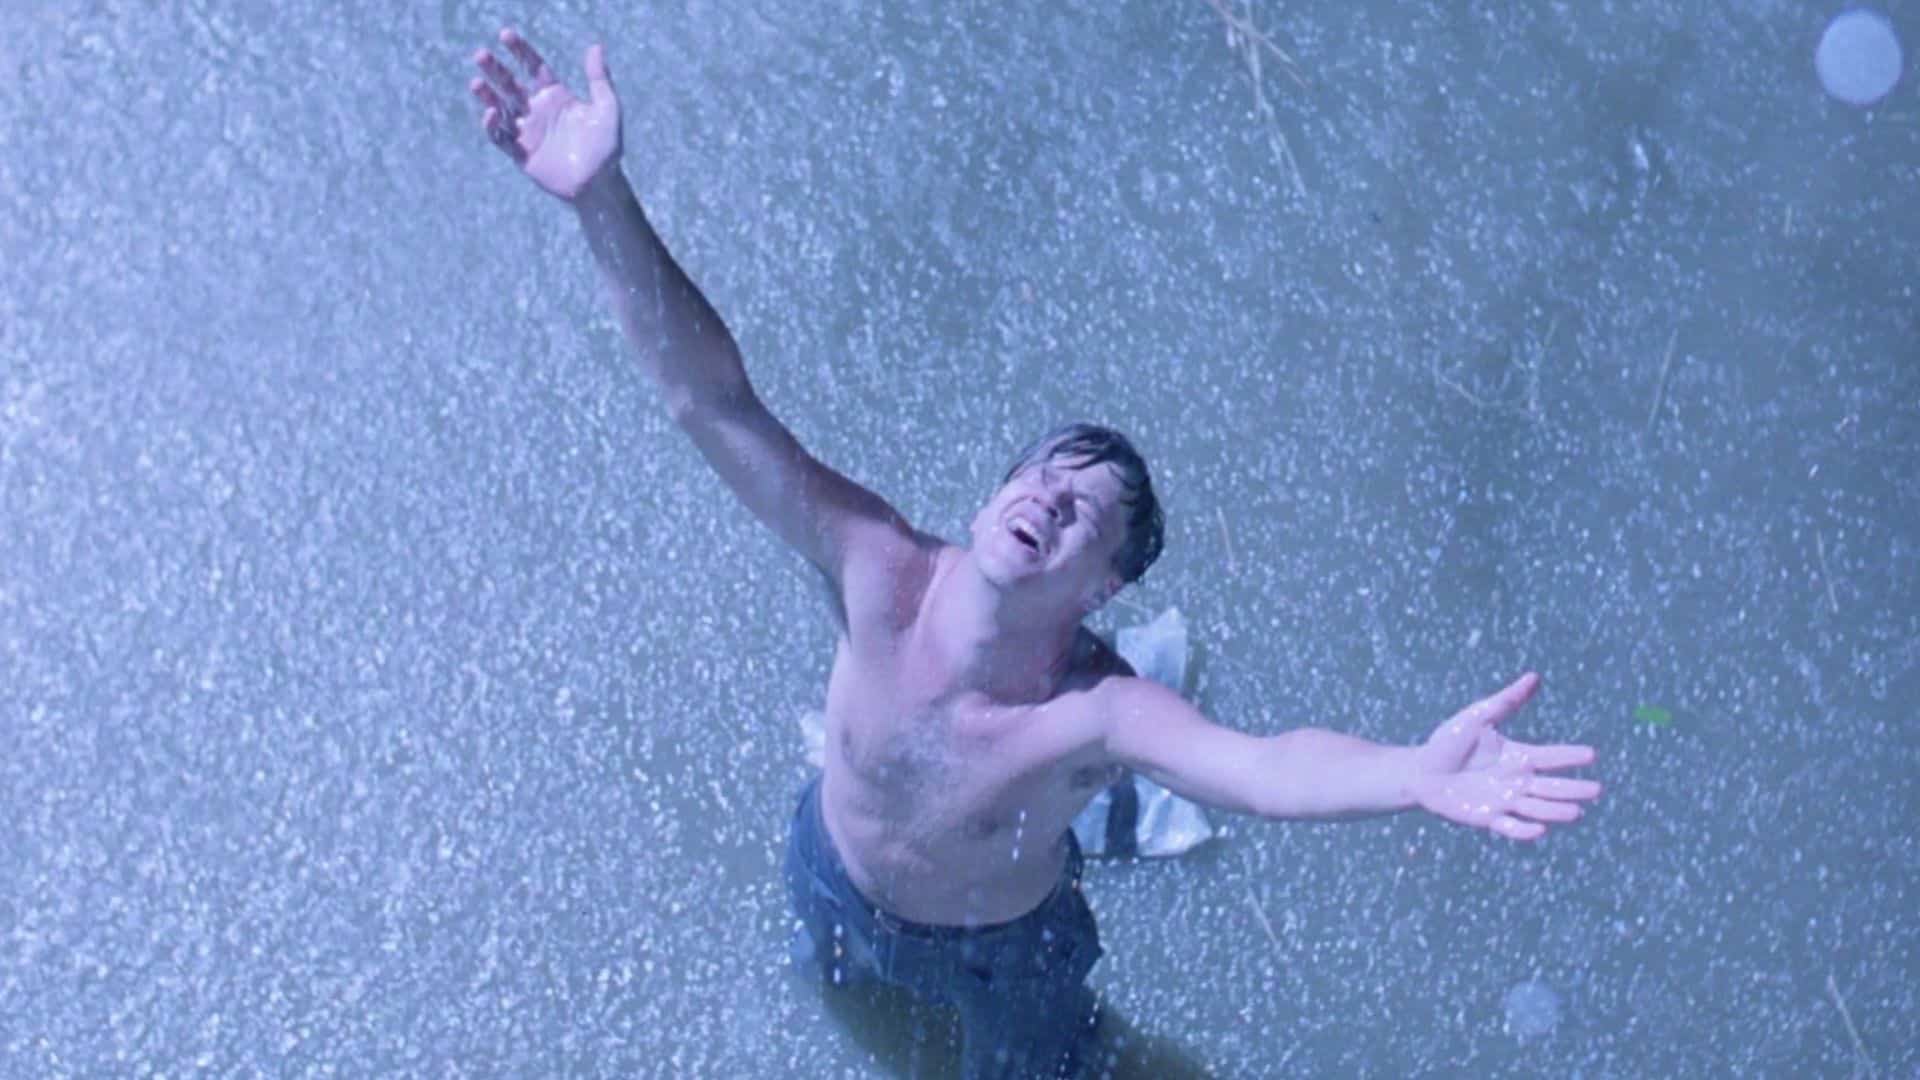  A man, shirtless, stands with arms open in the rain in this image from Castle Rock Entertainment.